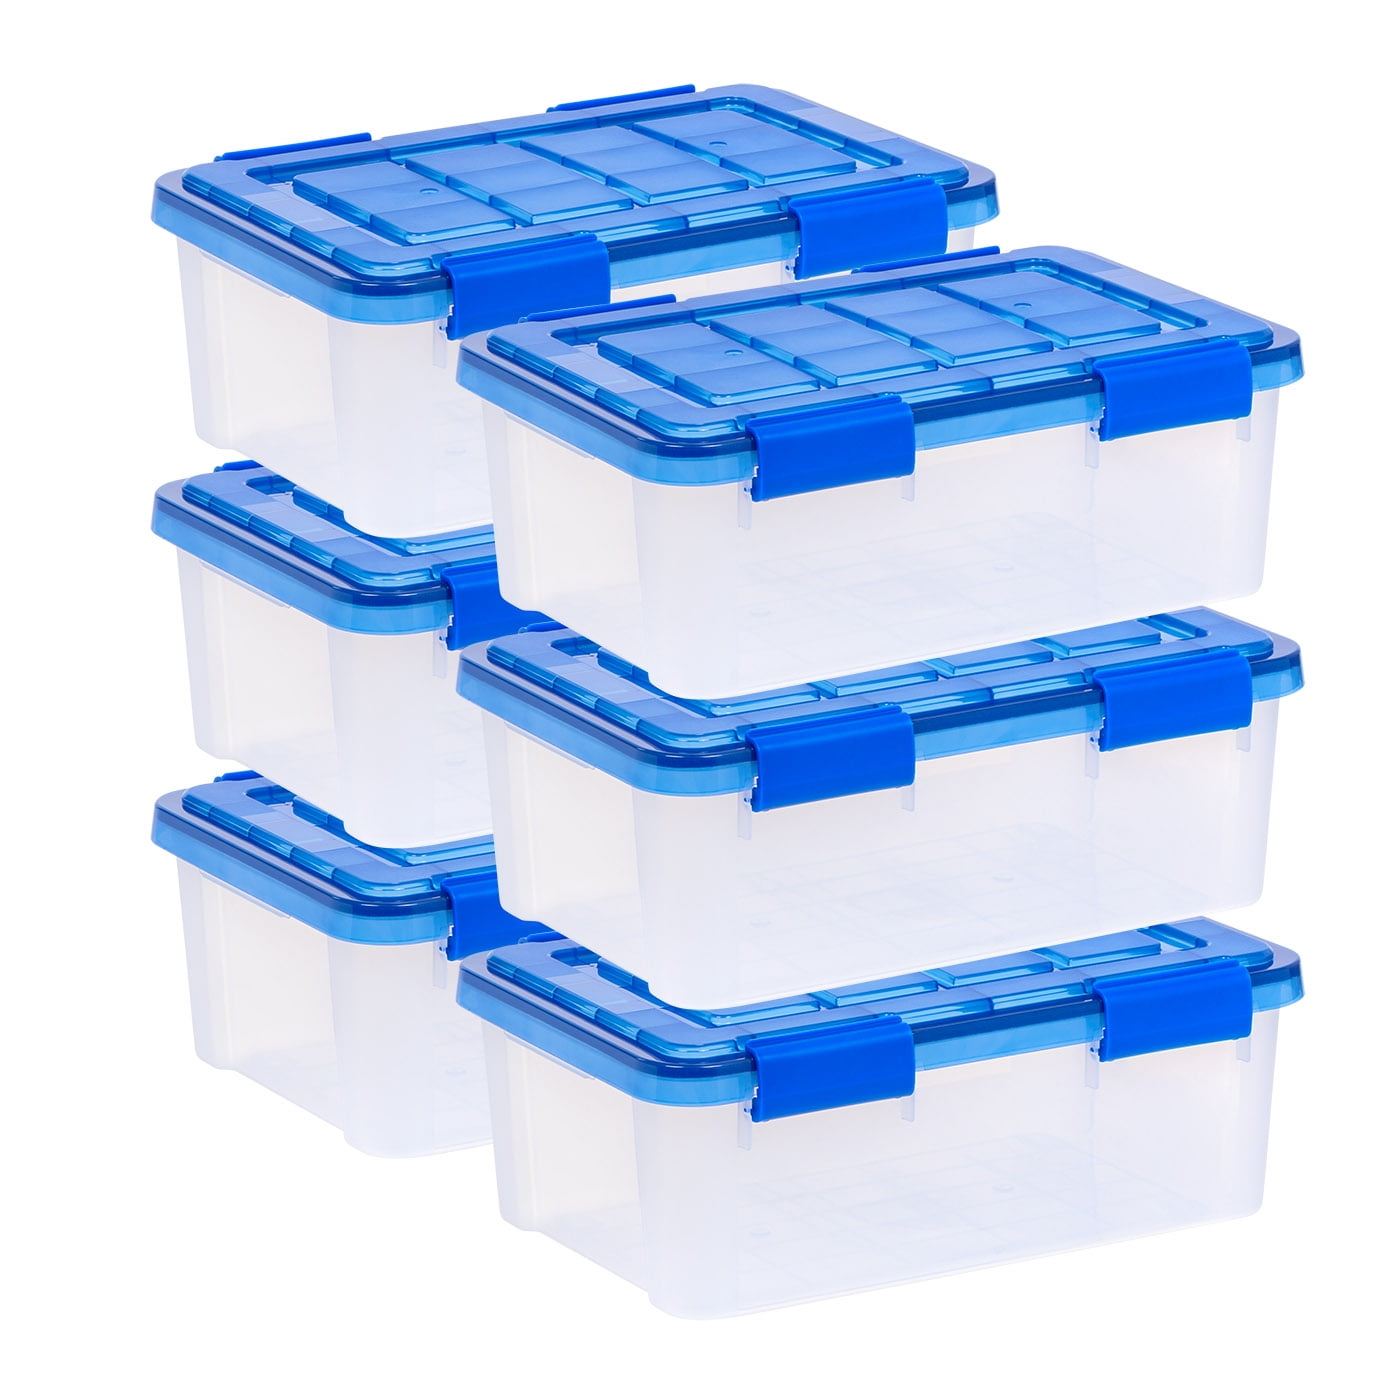 Iris 4 Gallon Clear Plastic Storage Boxes with Blue Lid, Pack of 6